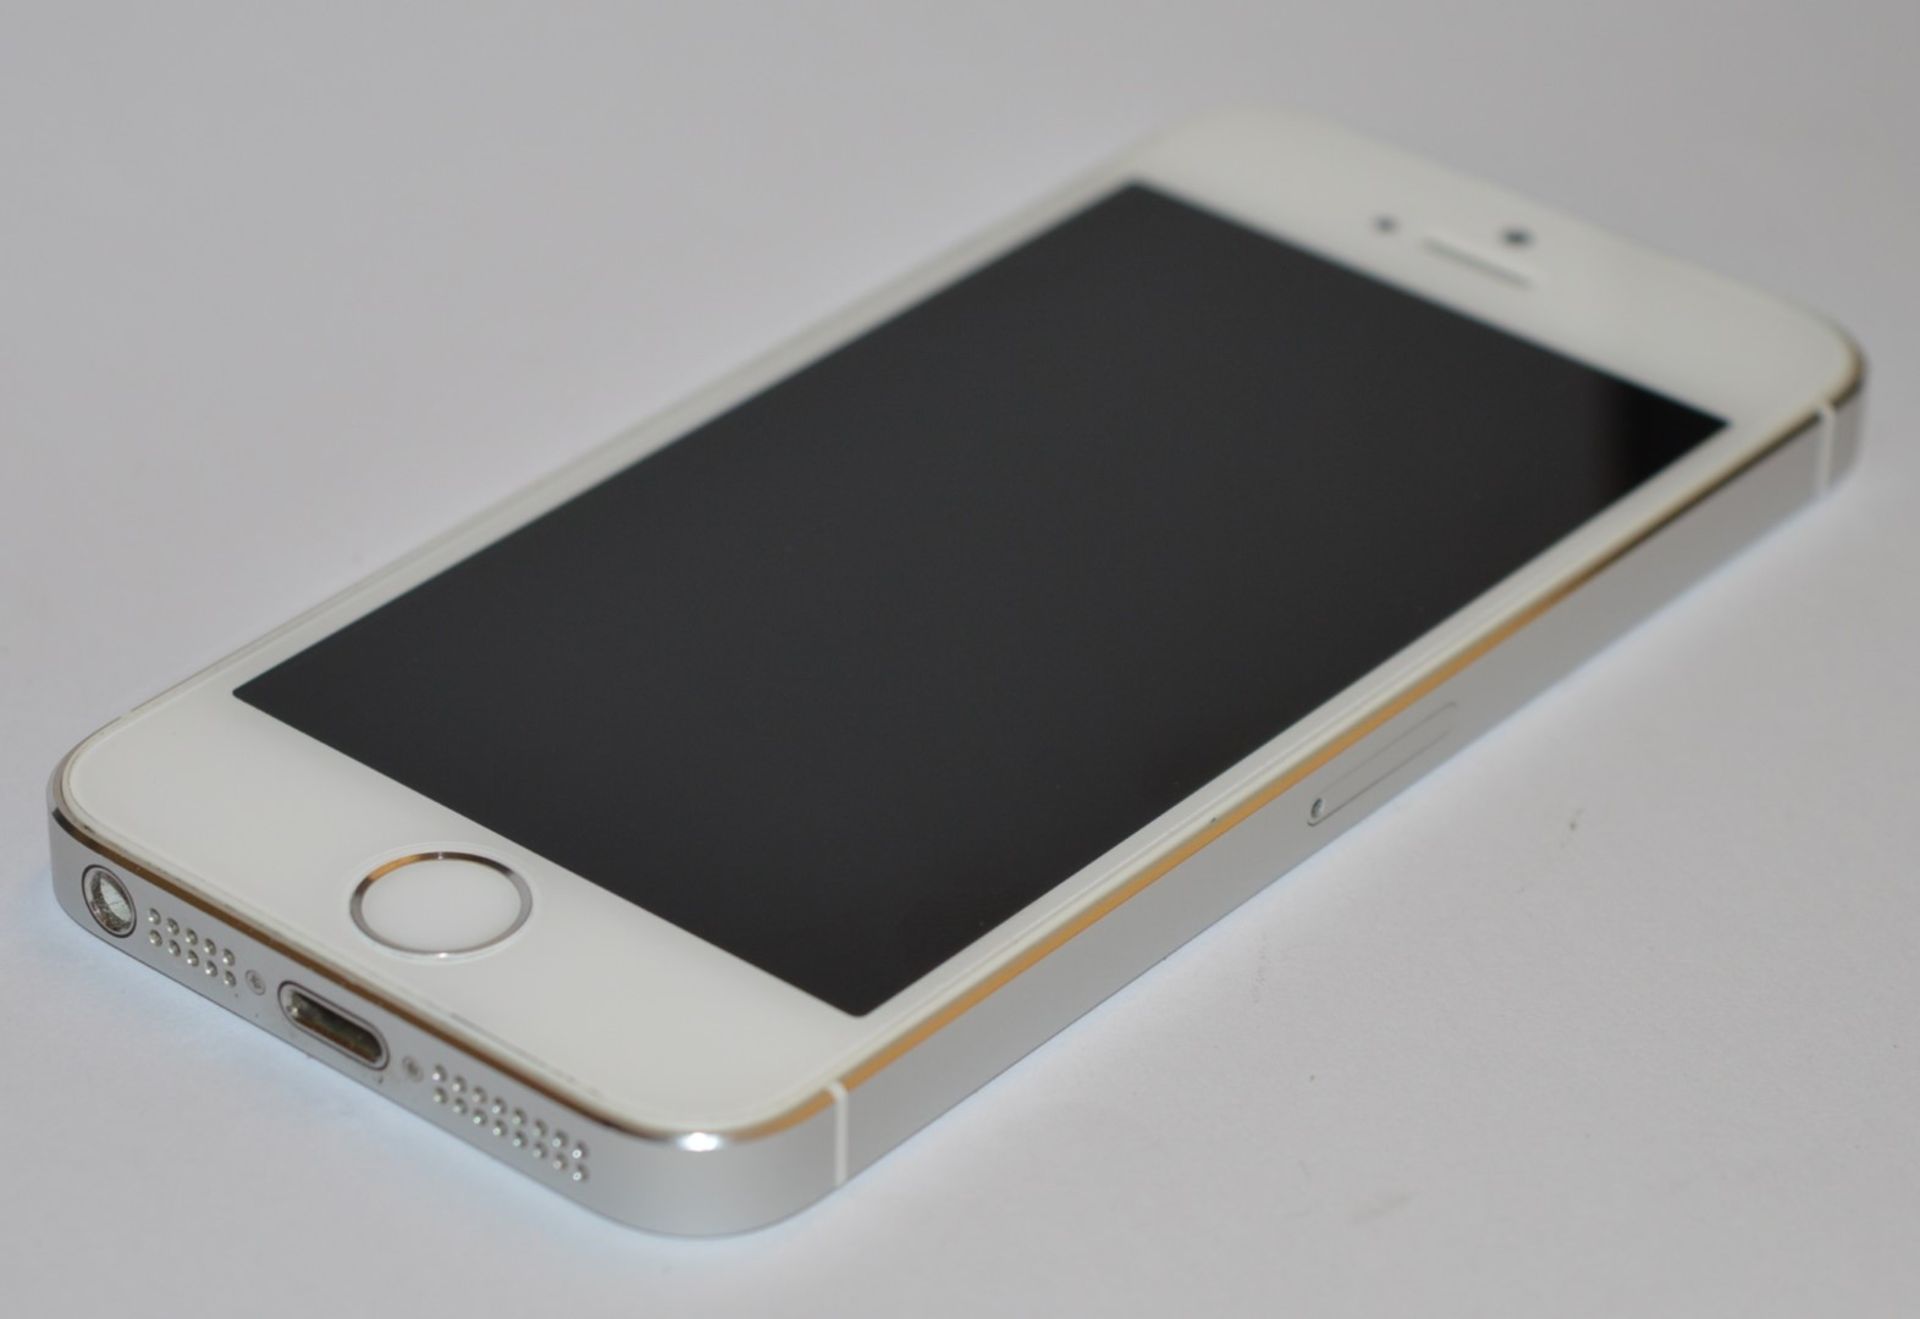 1 x Apple Iphone 5S White 32gb Mobile Phone - Model A1457 - Excellent Cosmetic Condition - Good - Image 8 of 15